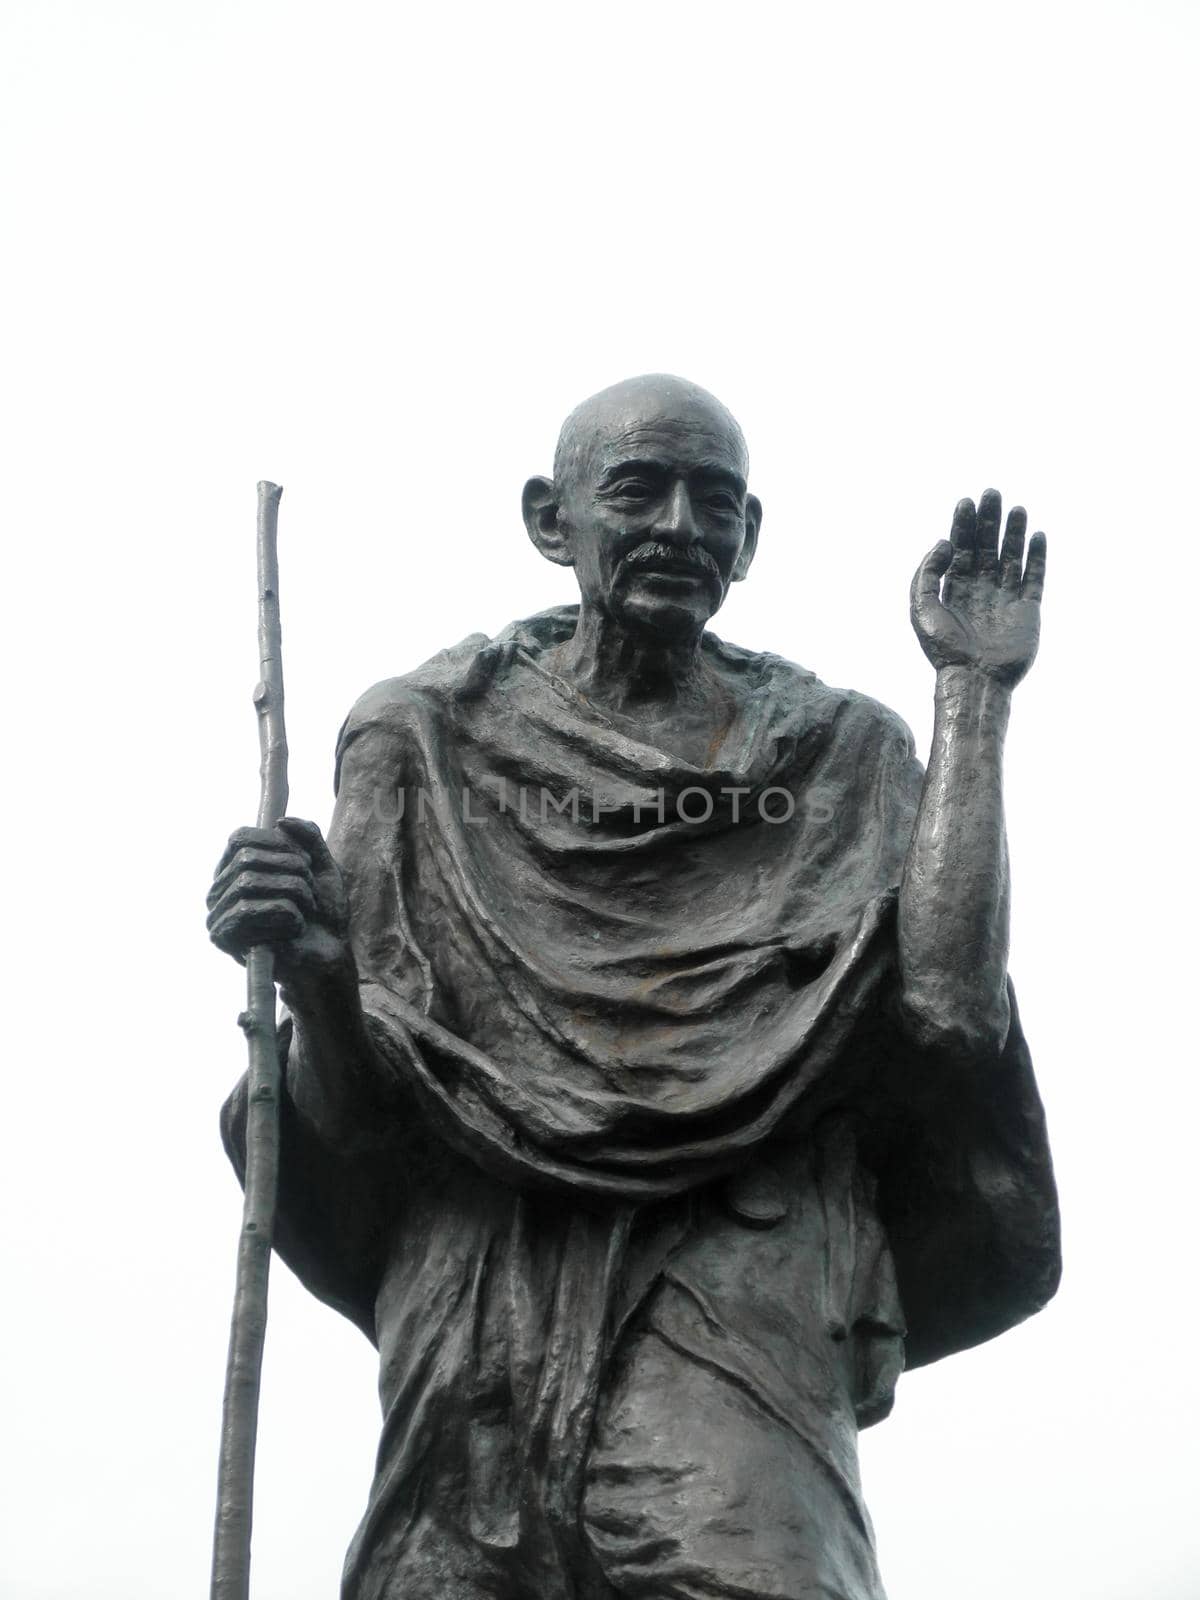 Statue of Ghandi  by EricGBVD